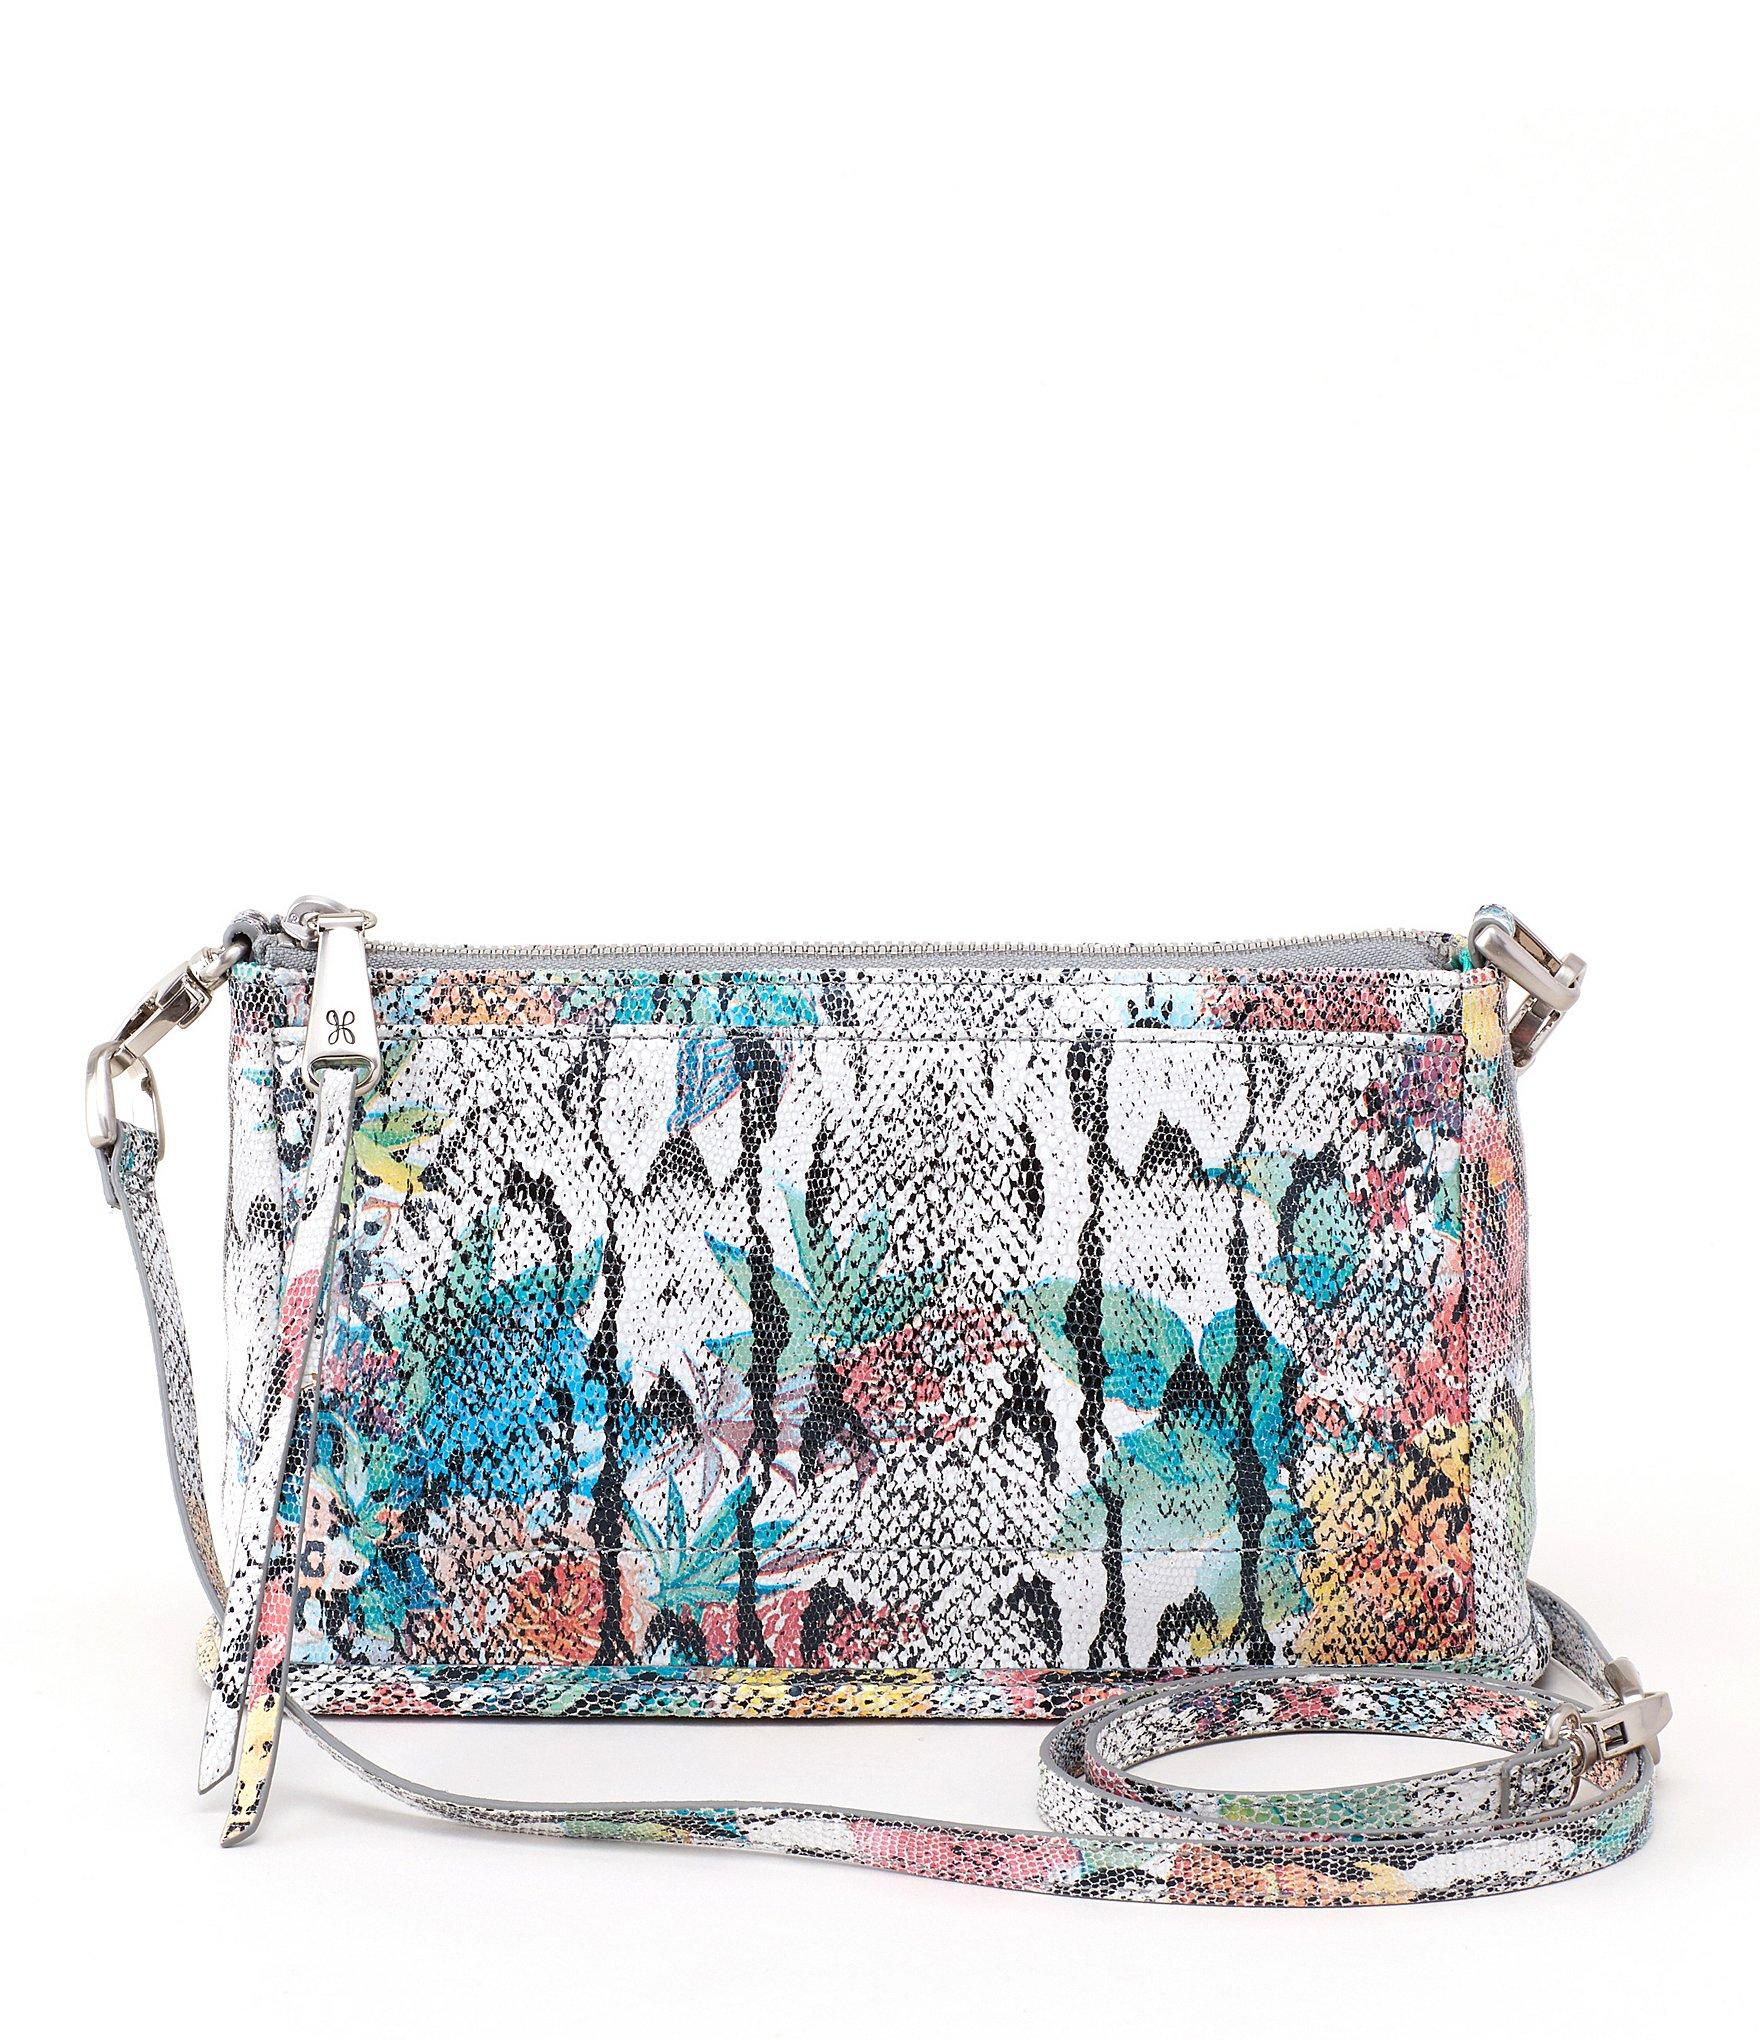 Hobo Leather Cadence Floral Cross-body Bag in Blue - Lyst